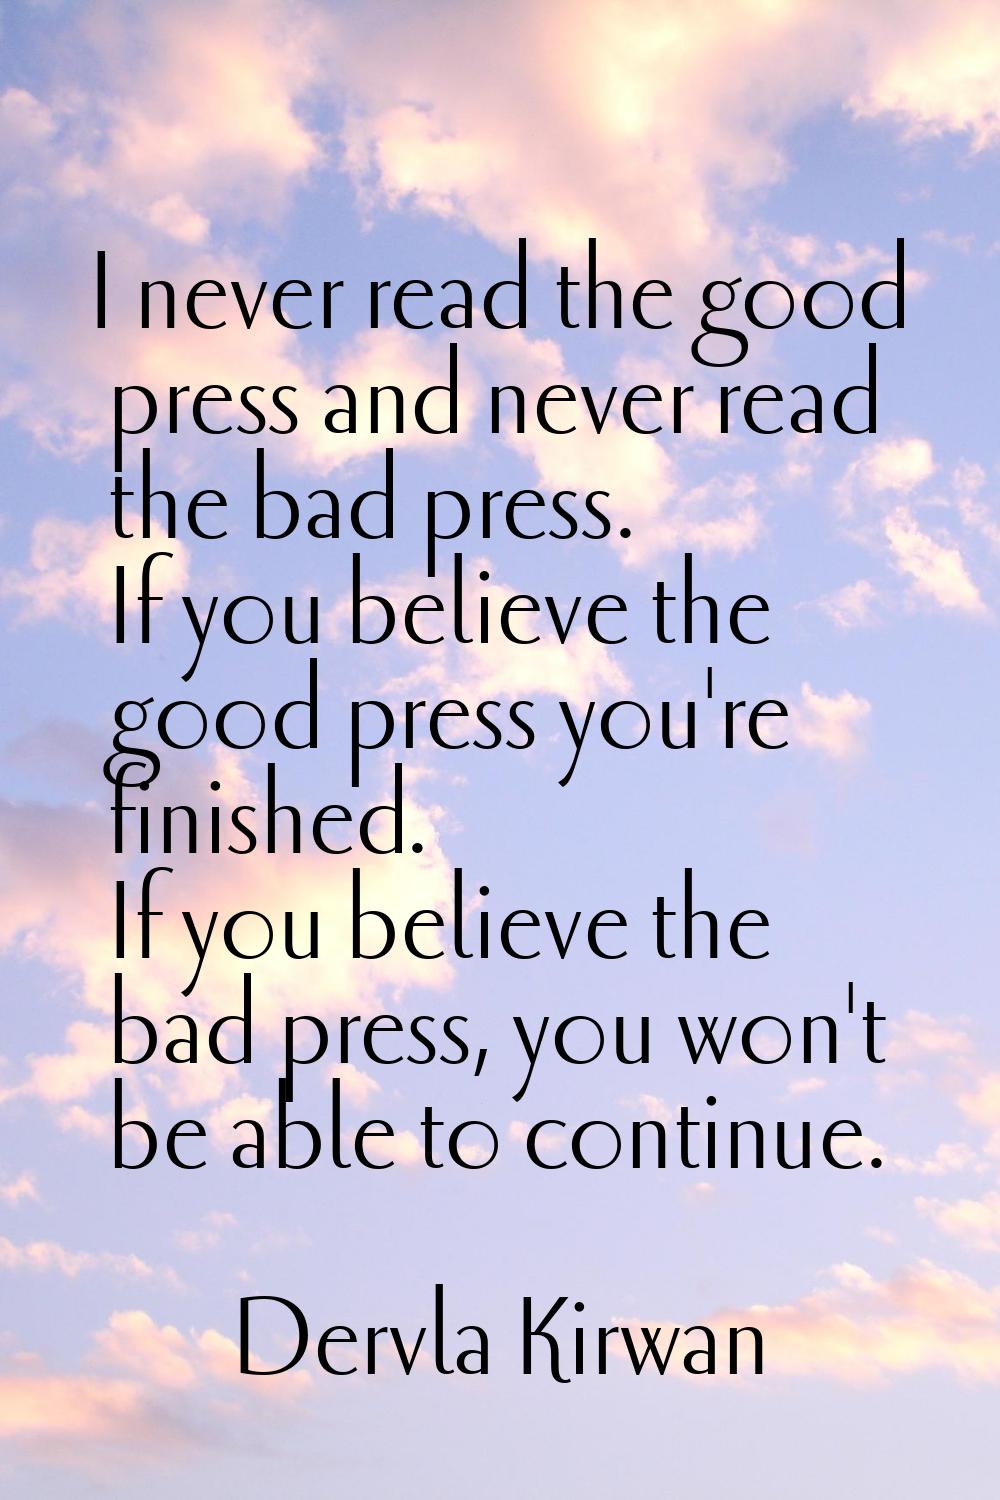 I never read the good press and never read the bad press. If you believe the good press you're fini